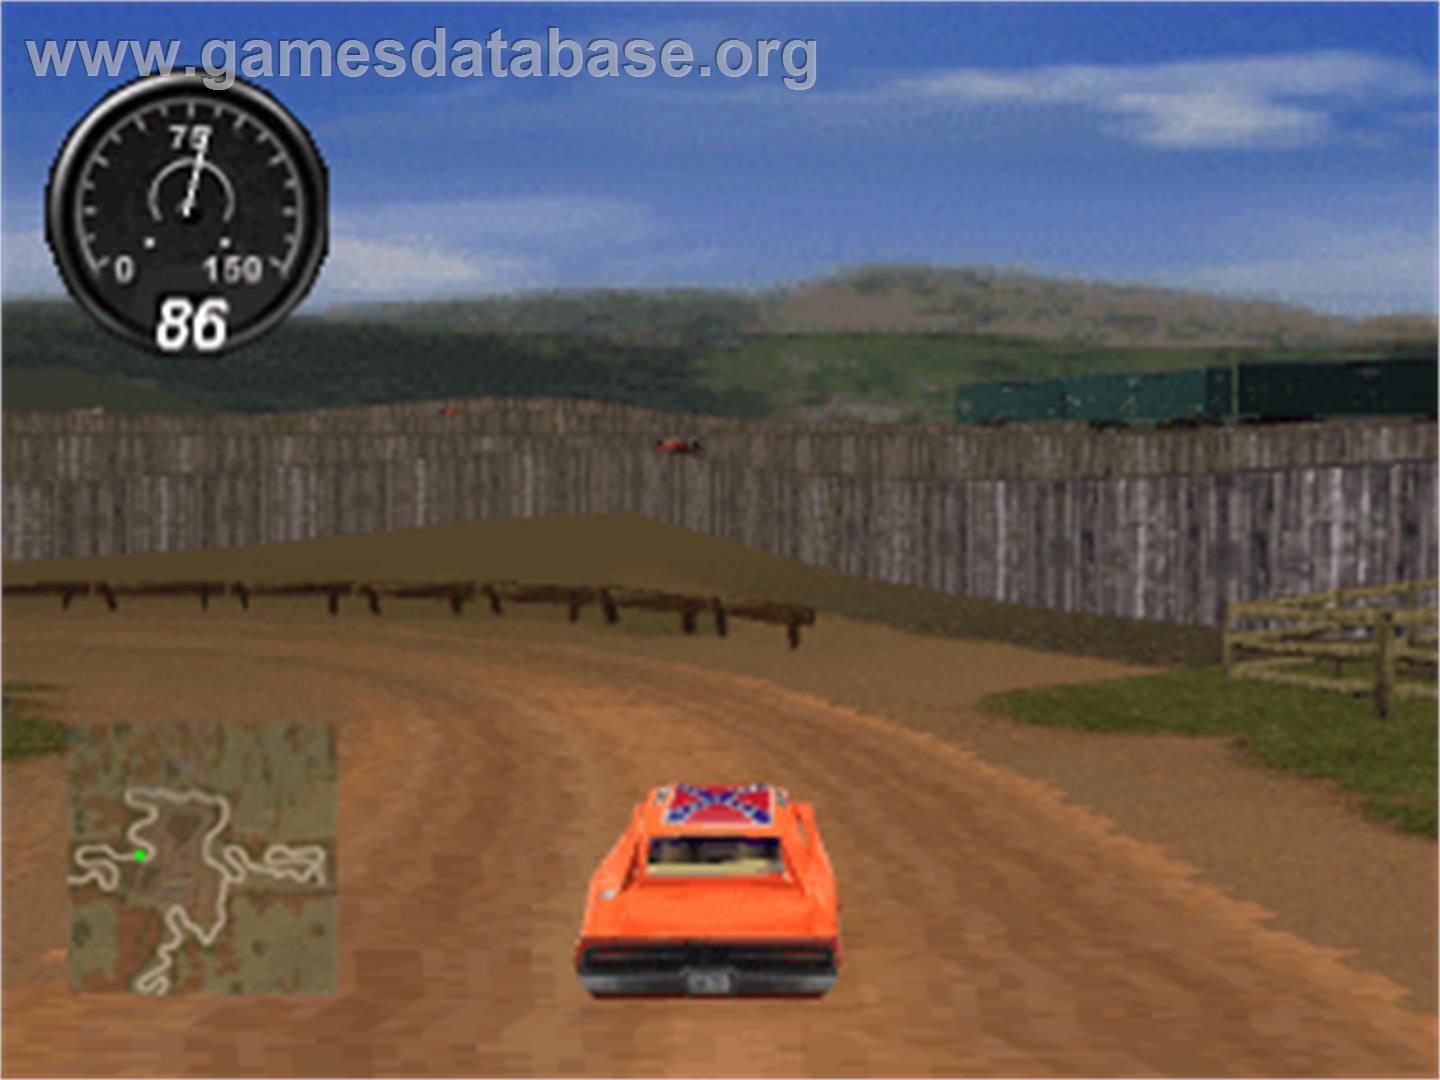 Dukes of Hazzard II: Daisy Dukes It Out - Sony Playstation - Artwork - In Game